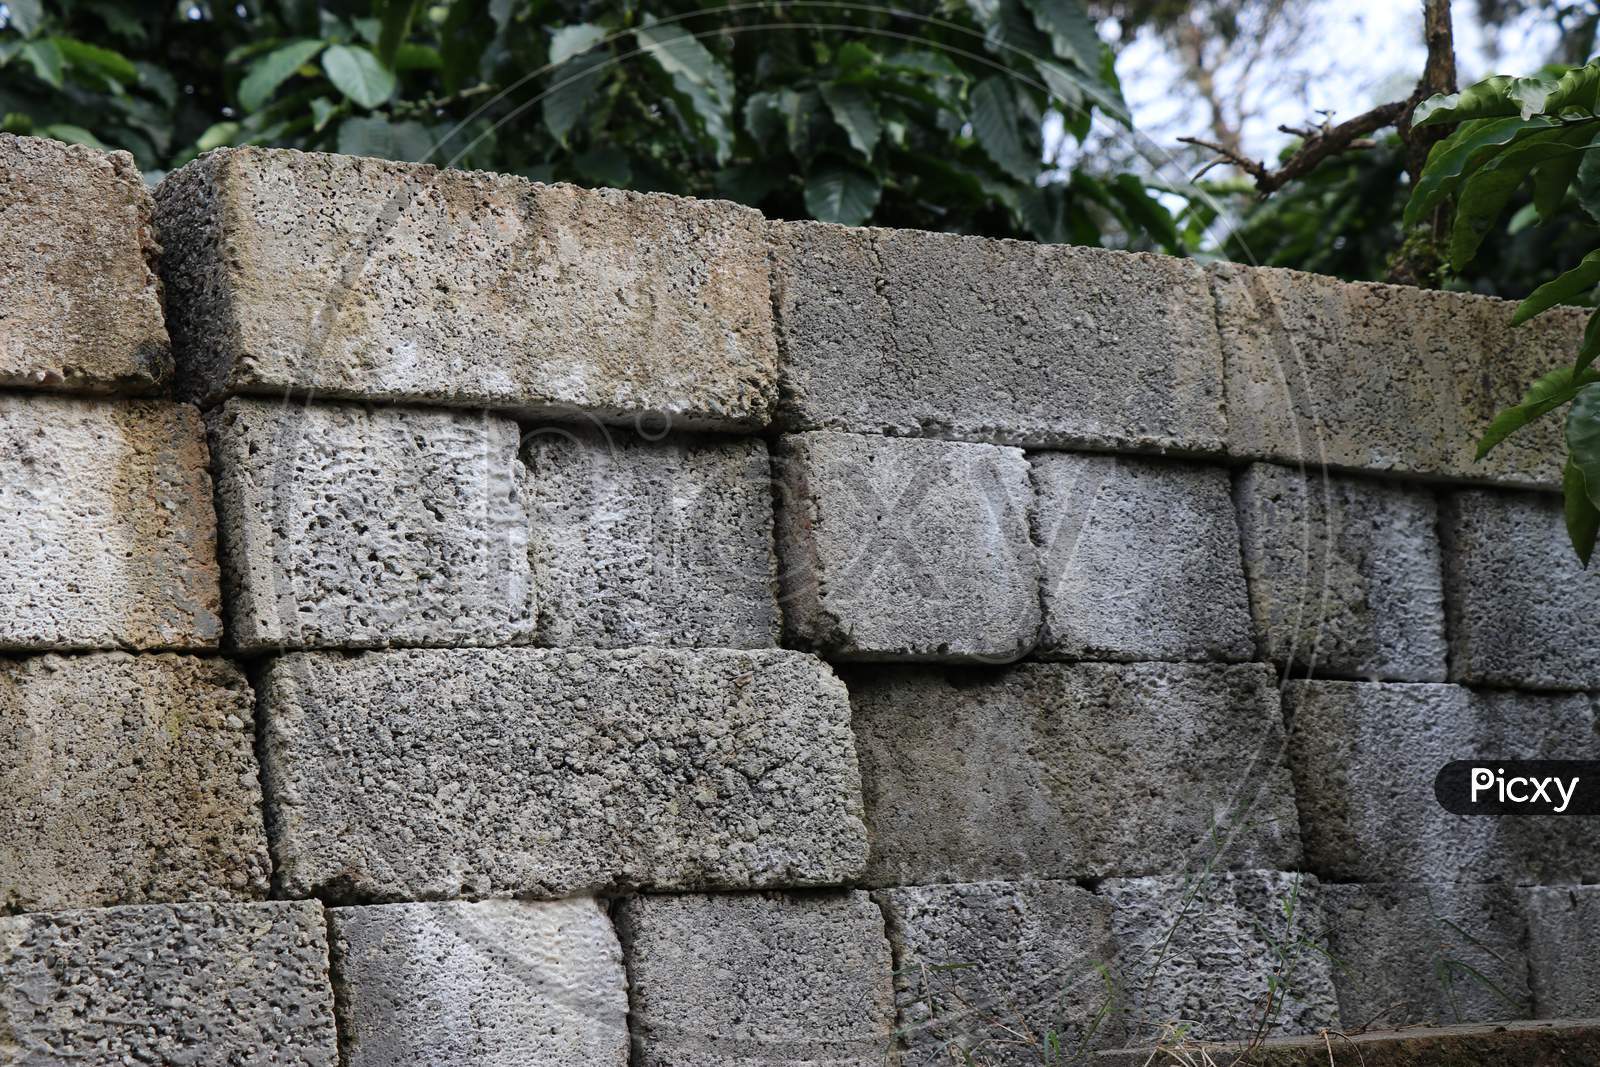 Cement Bricks Arranged In Wall Form With Nature Background